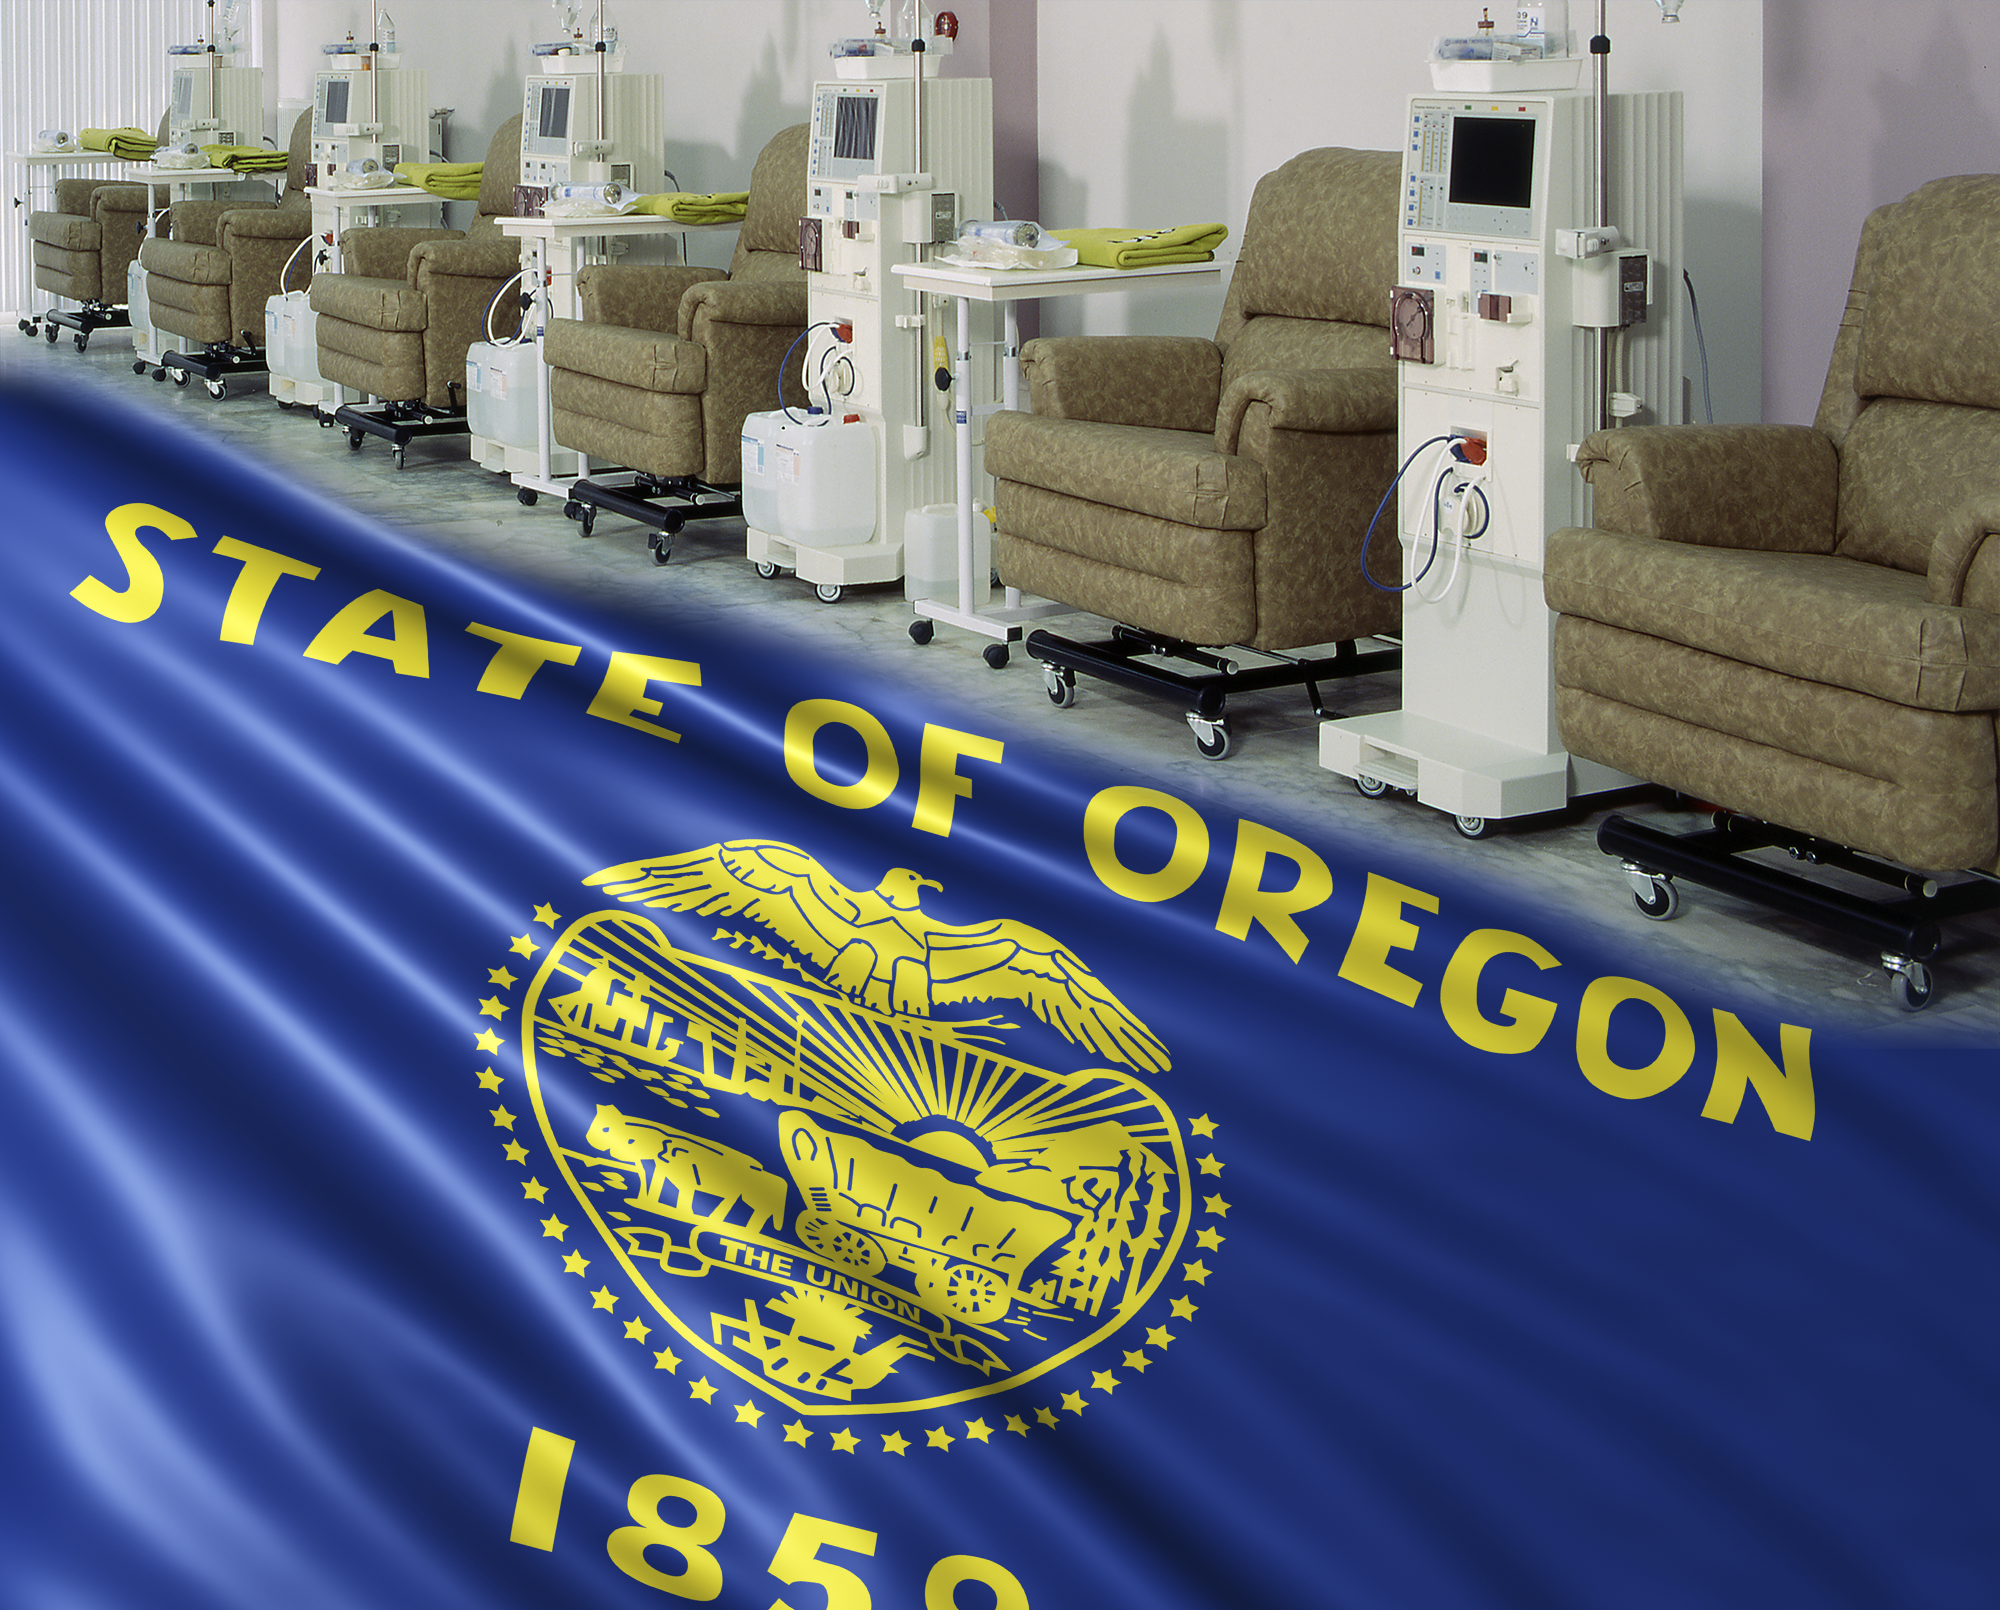 row of dialysis chairs at a clinic with Oregon state flag blended into the picture